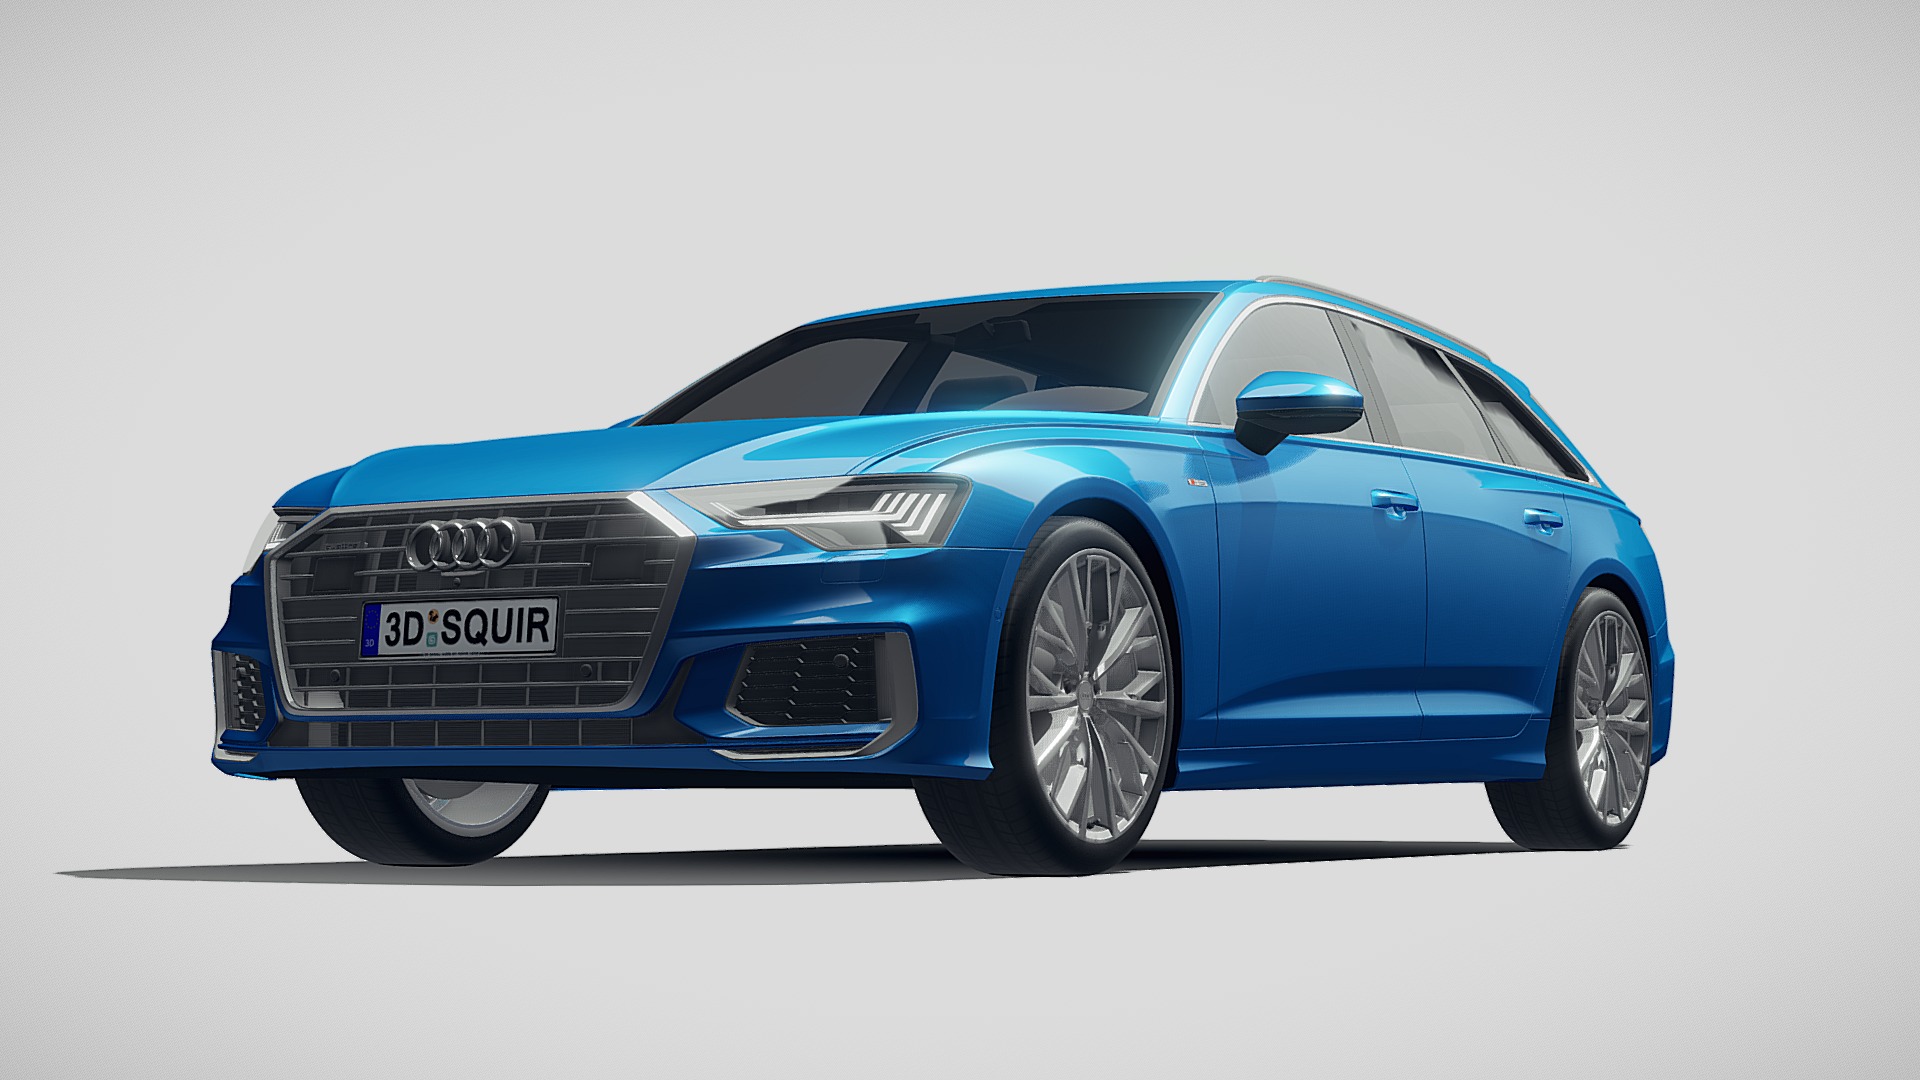 3D model Audi A6 Avant S-line 2019 - This is a 3D model of the Audi A6 Avant S-line 2019. The 3D model is about a blue car with a white background.